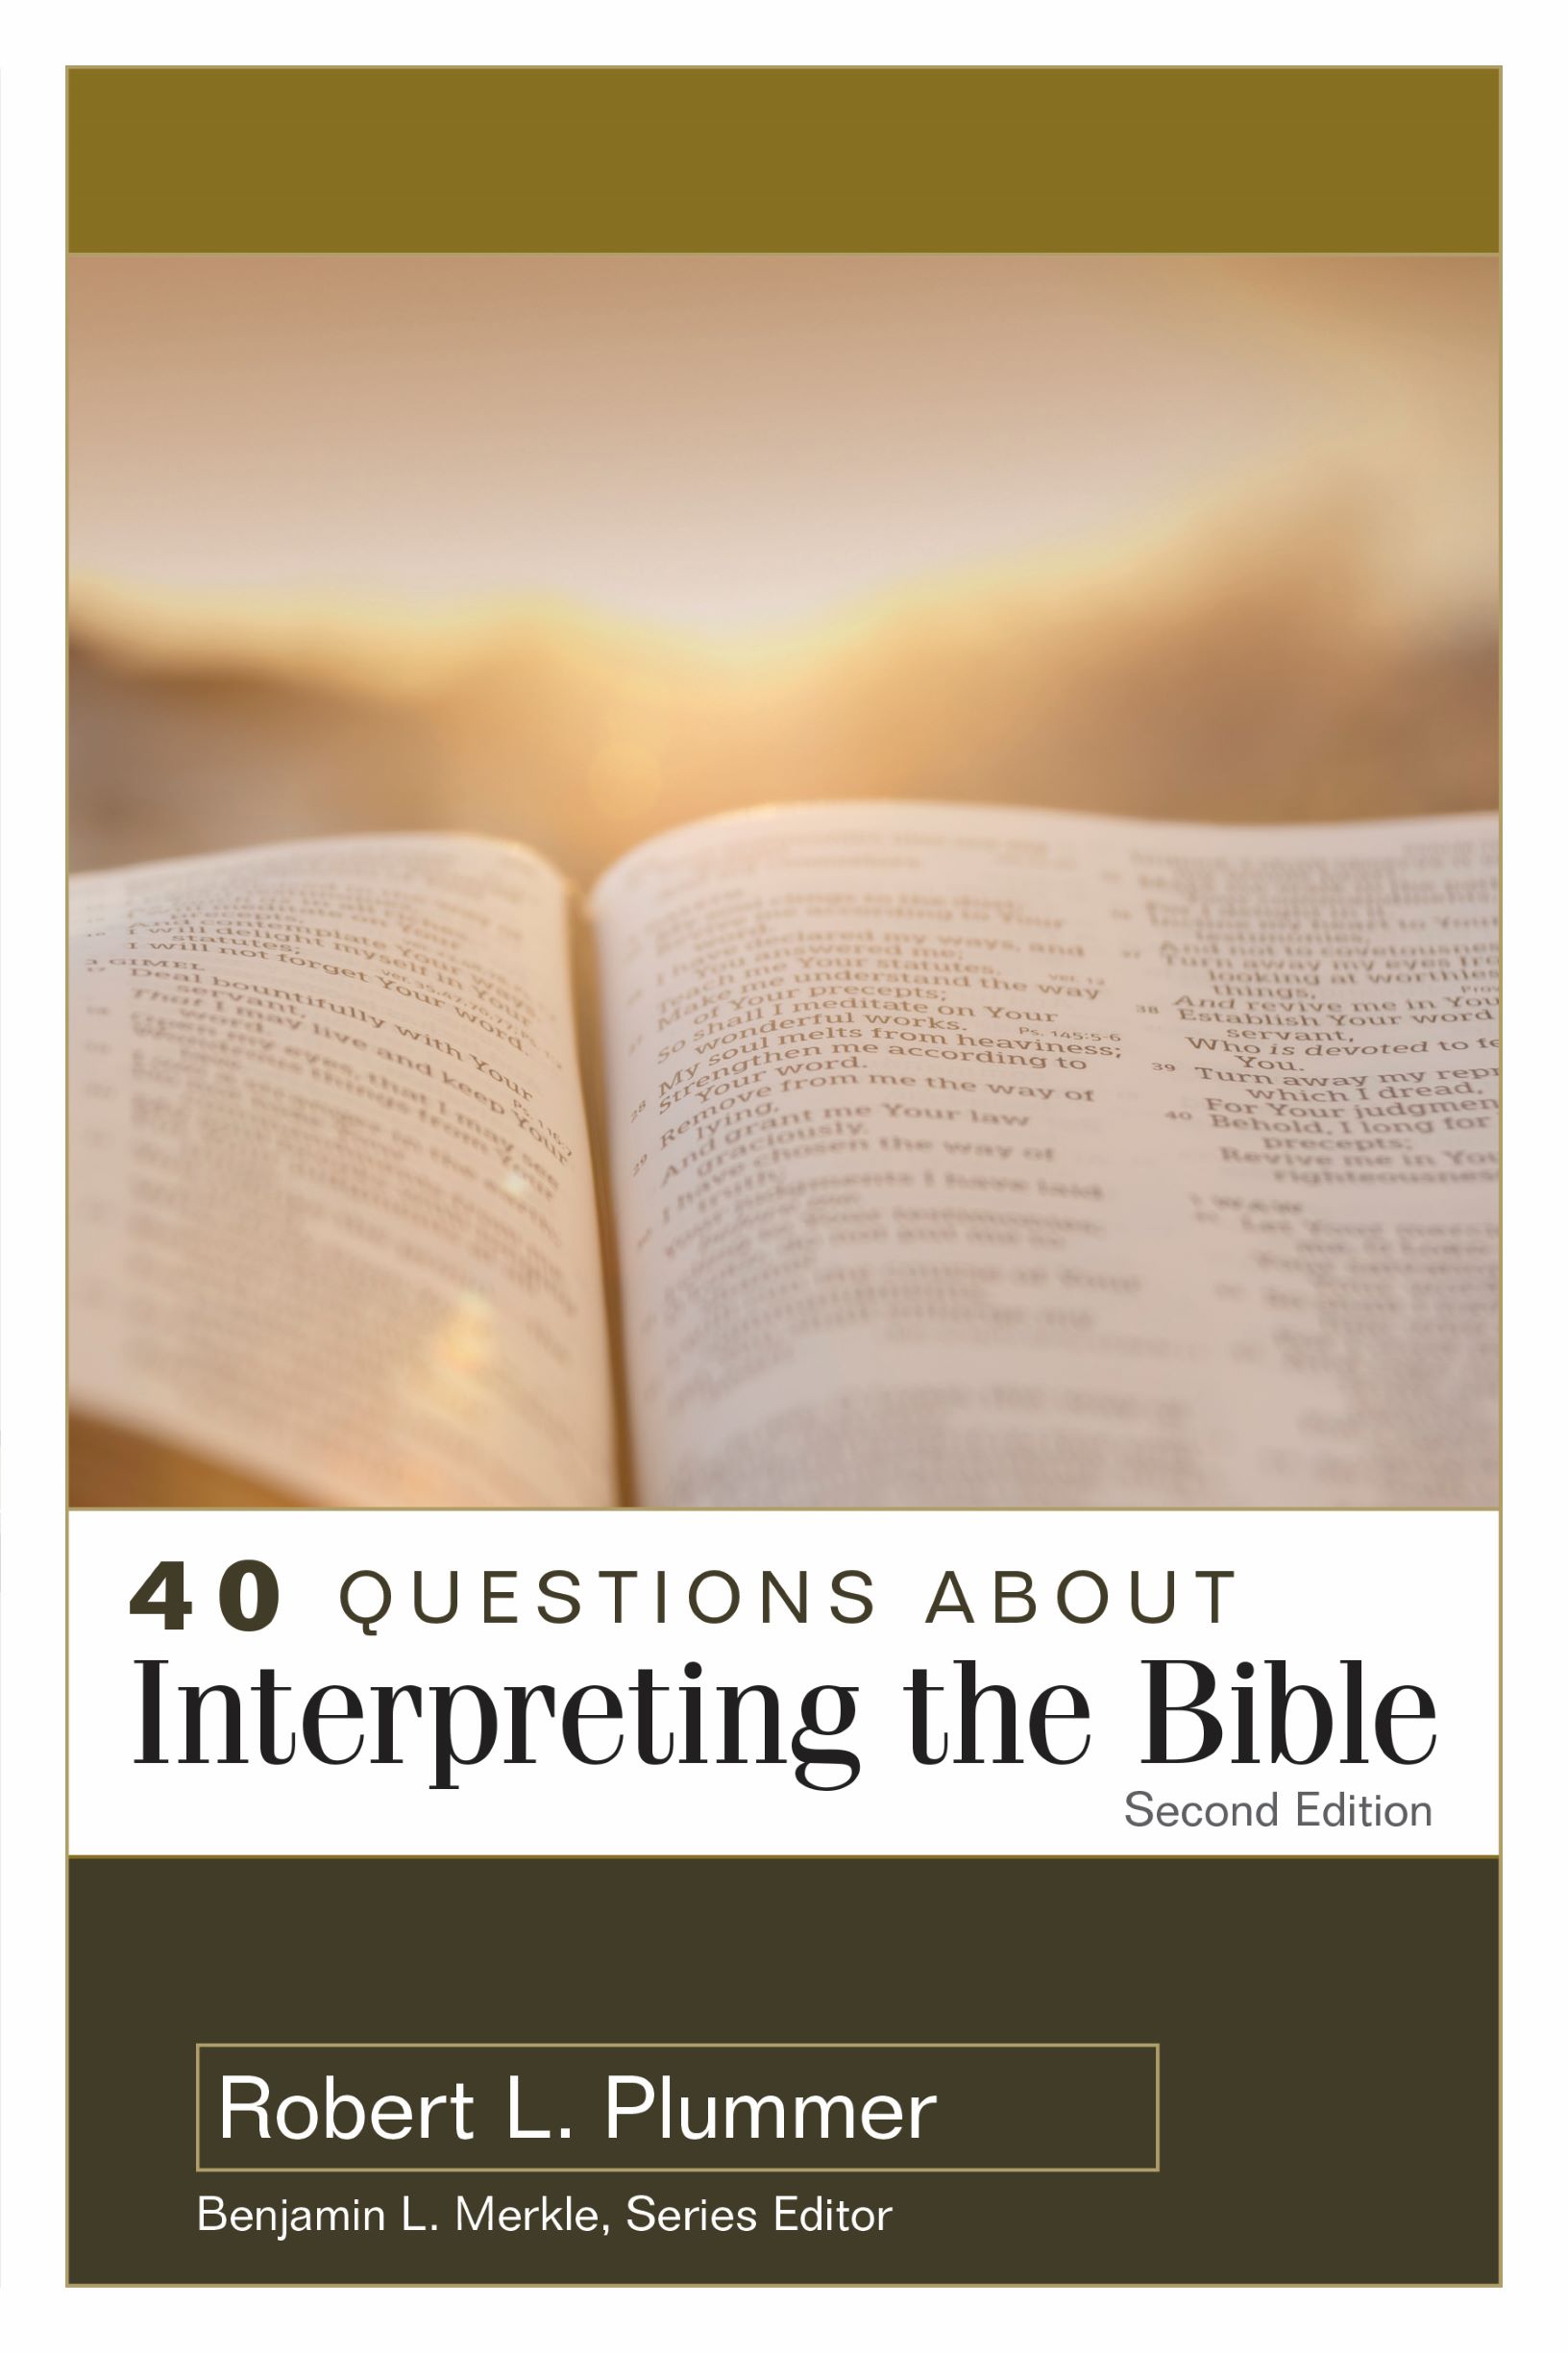 40 Questions about Interpreting the Bible, 2nd ed.